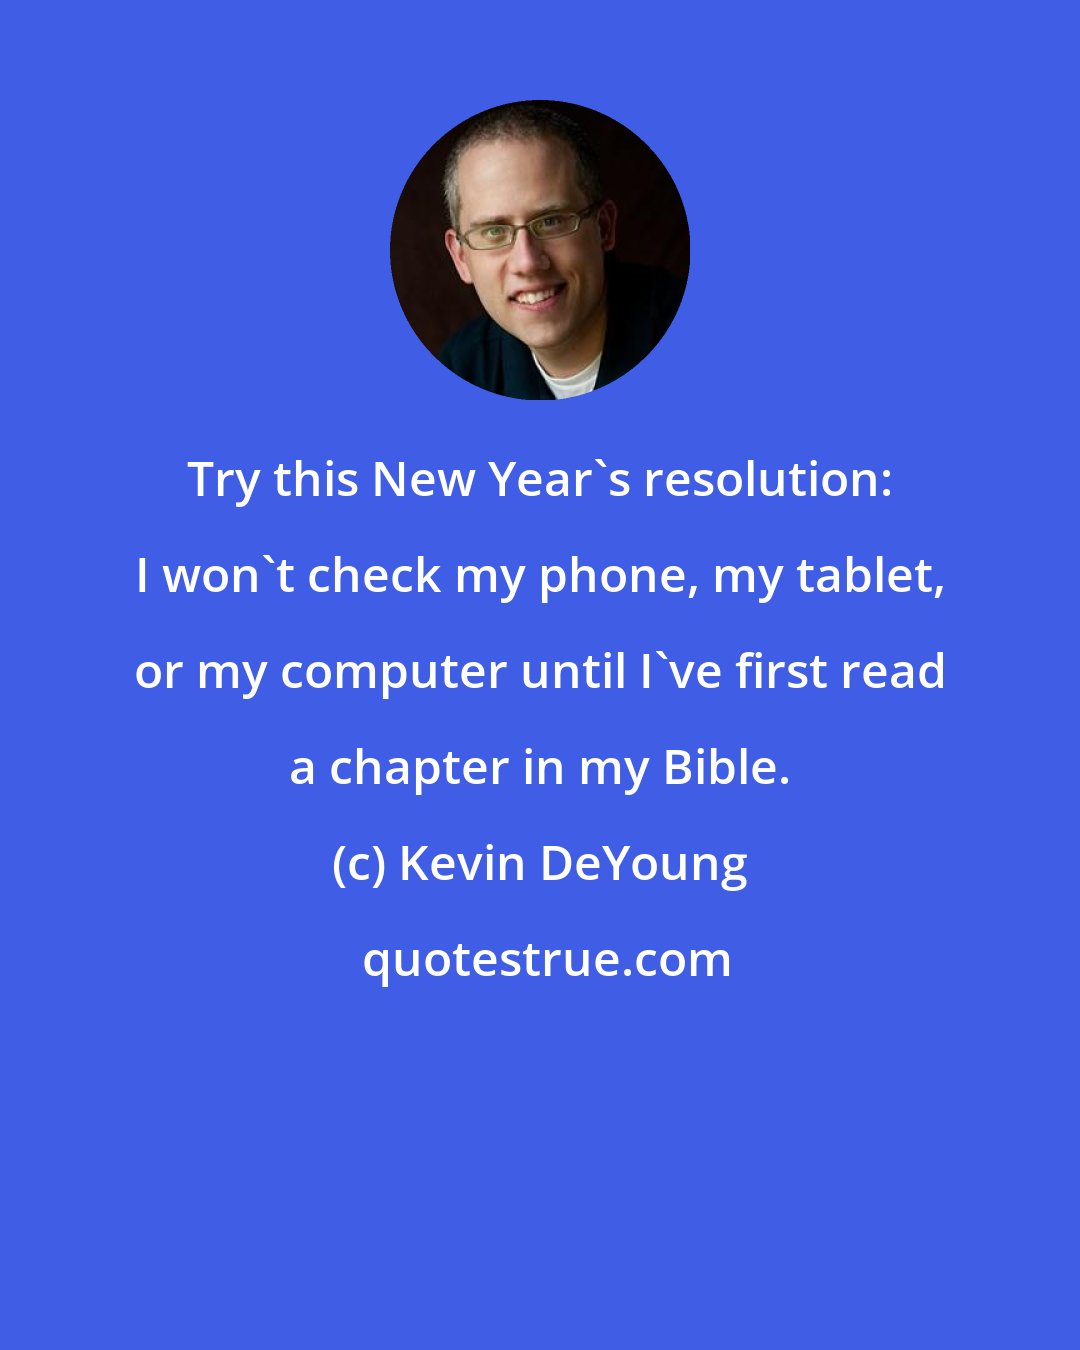 Kevin DeYoung: Try this New Year's resolution: I won't check my phone, my tablet, or my computer until I've first read a chapter in my Bible.